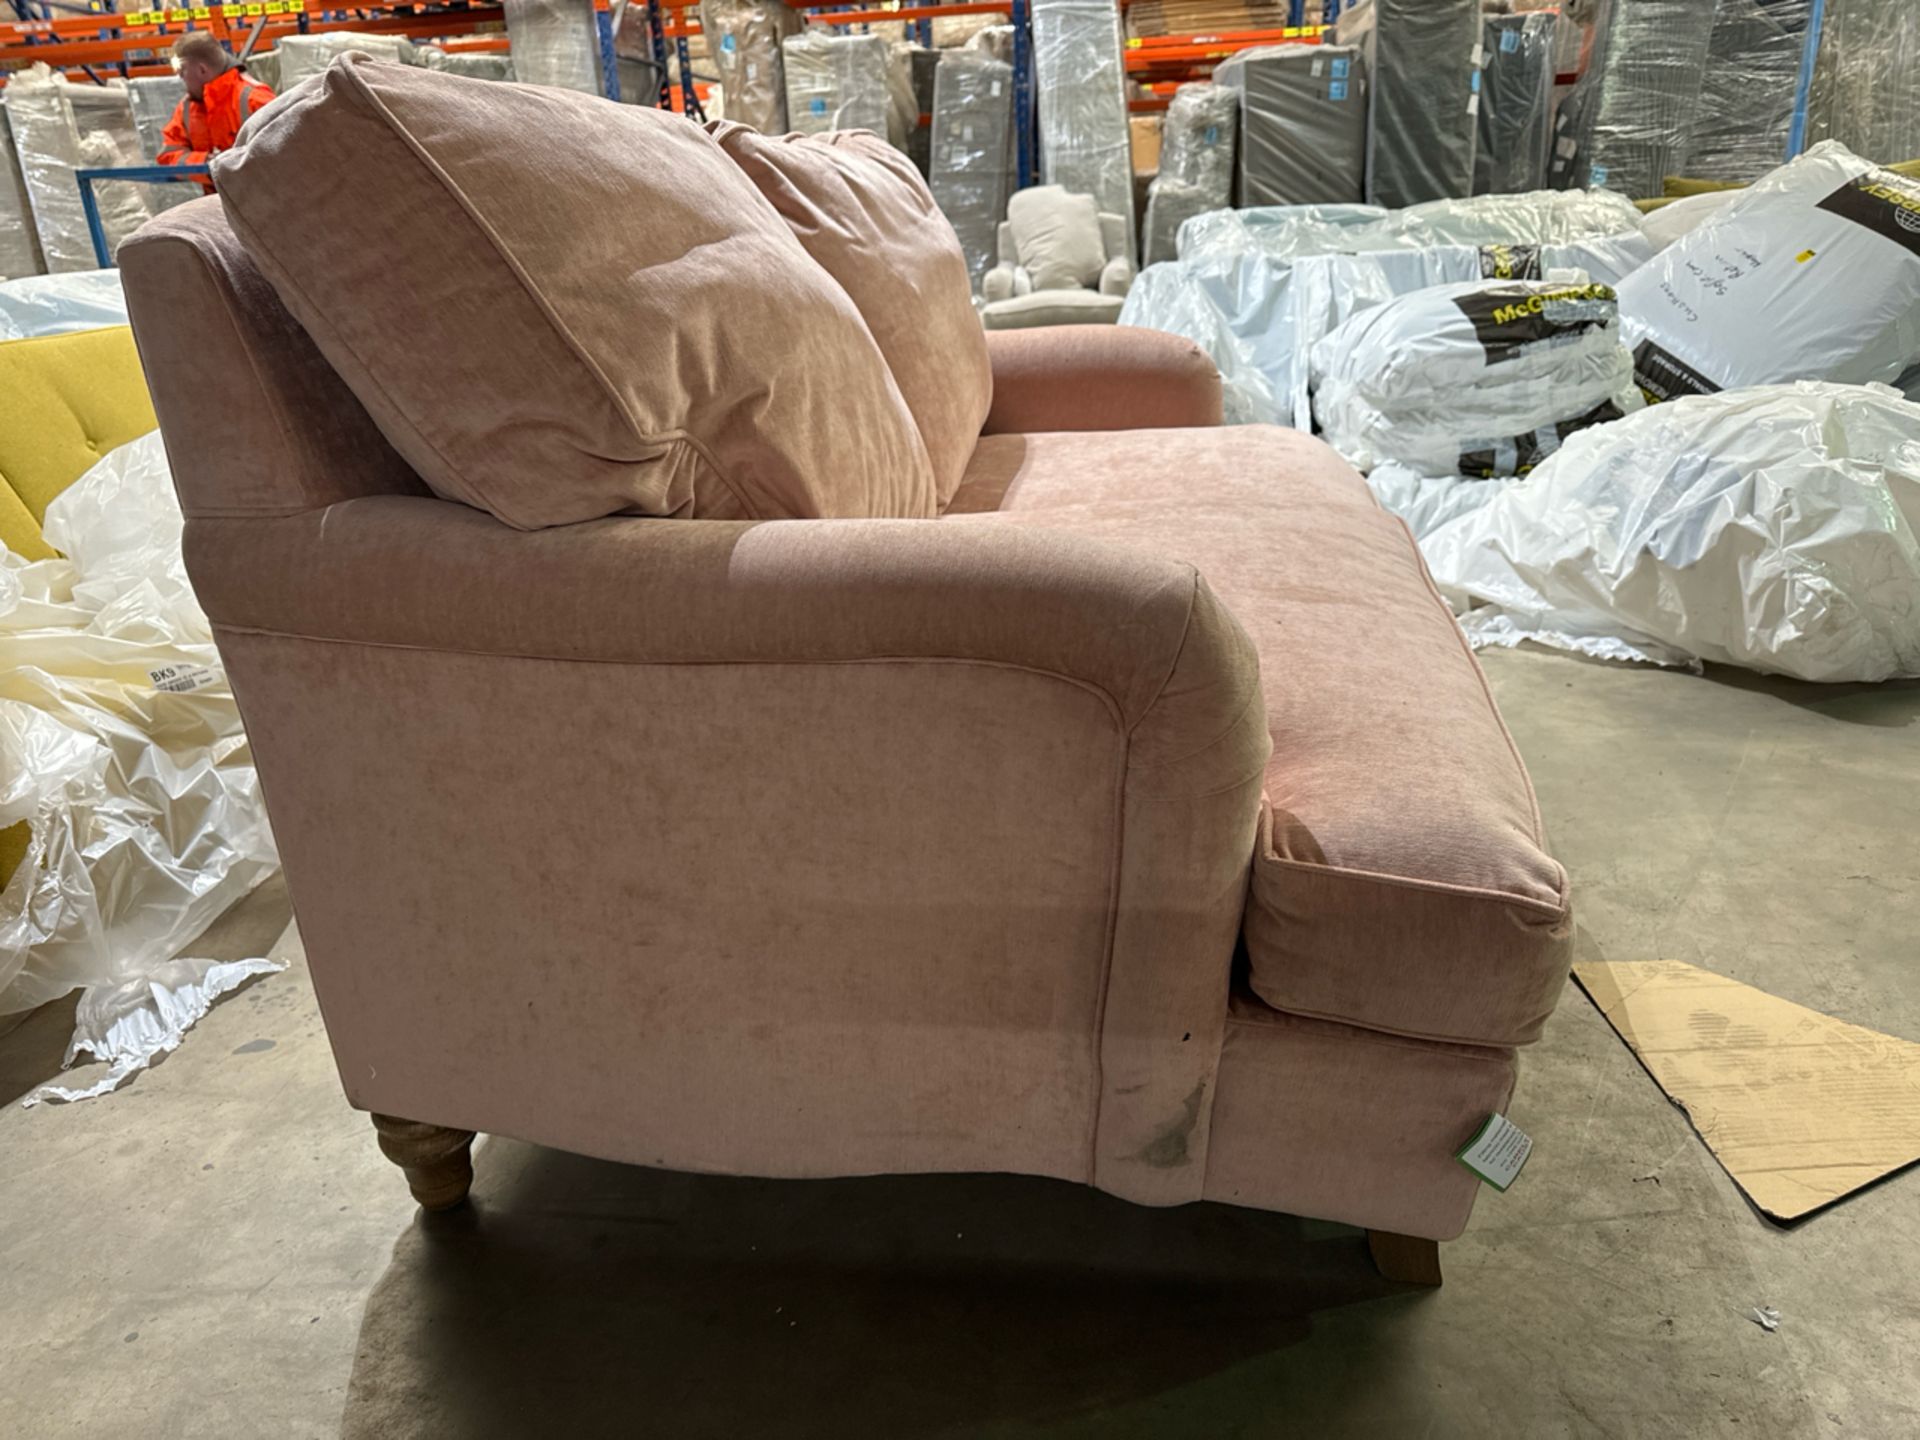 Bluebell 2 Seat Sofa - Image 2 of 5